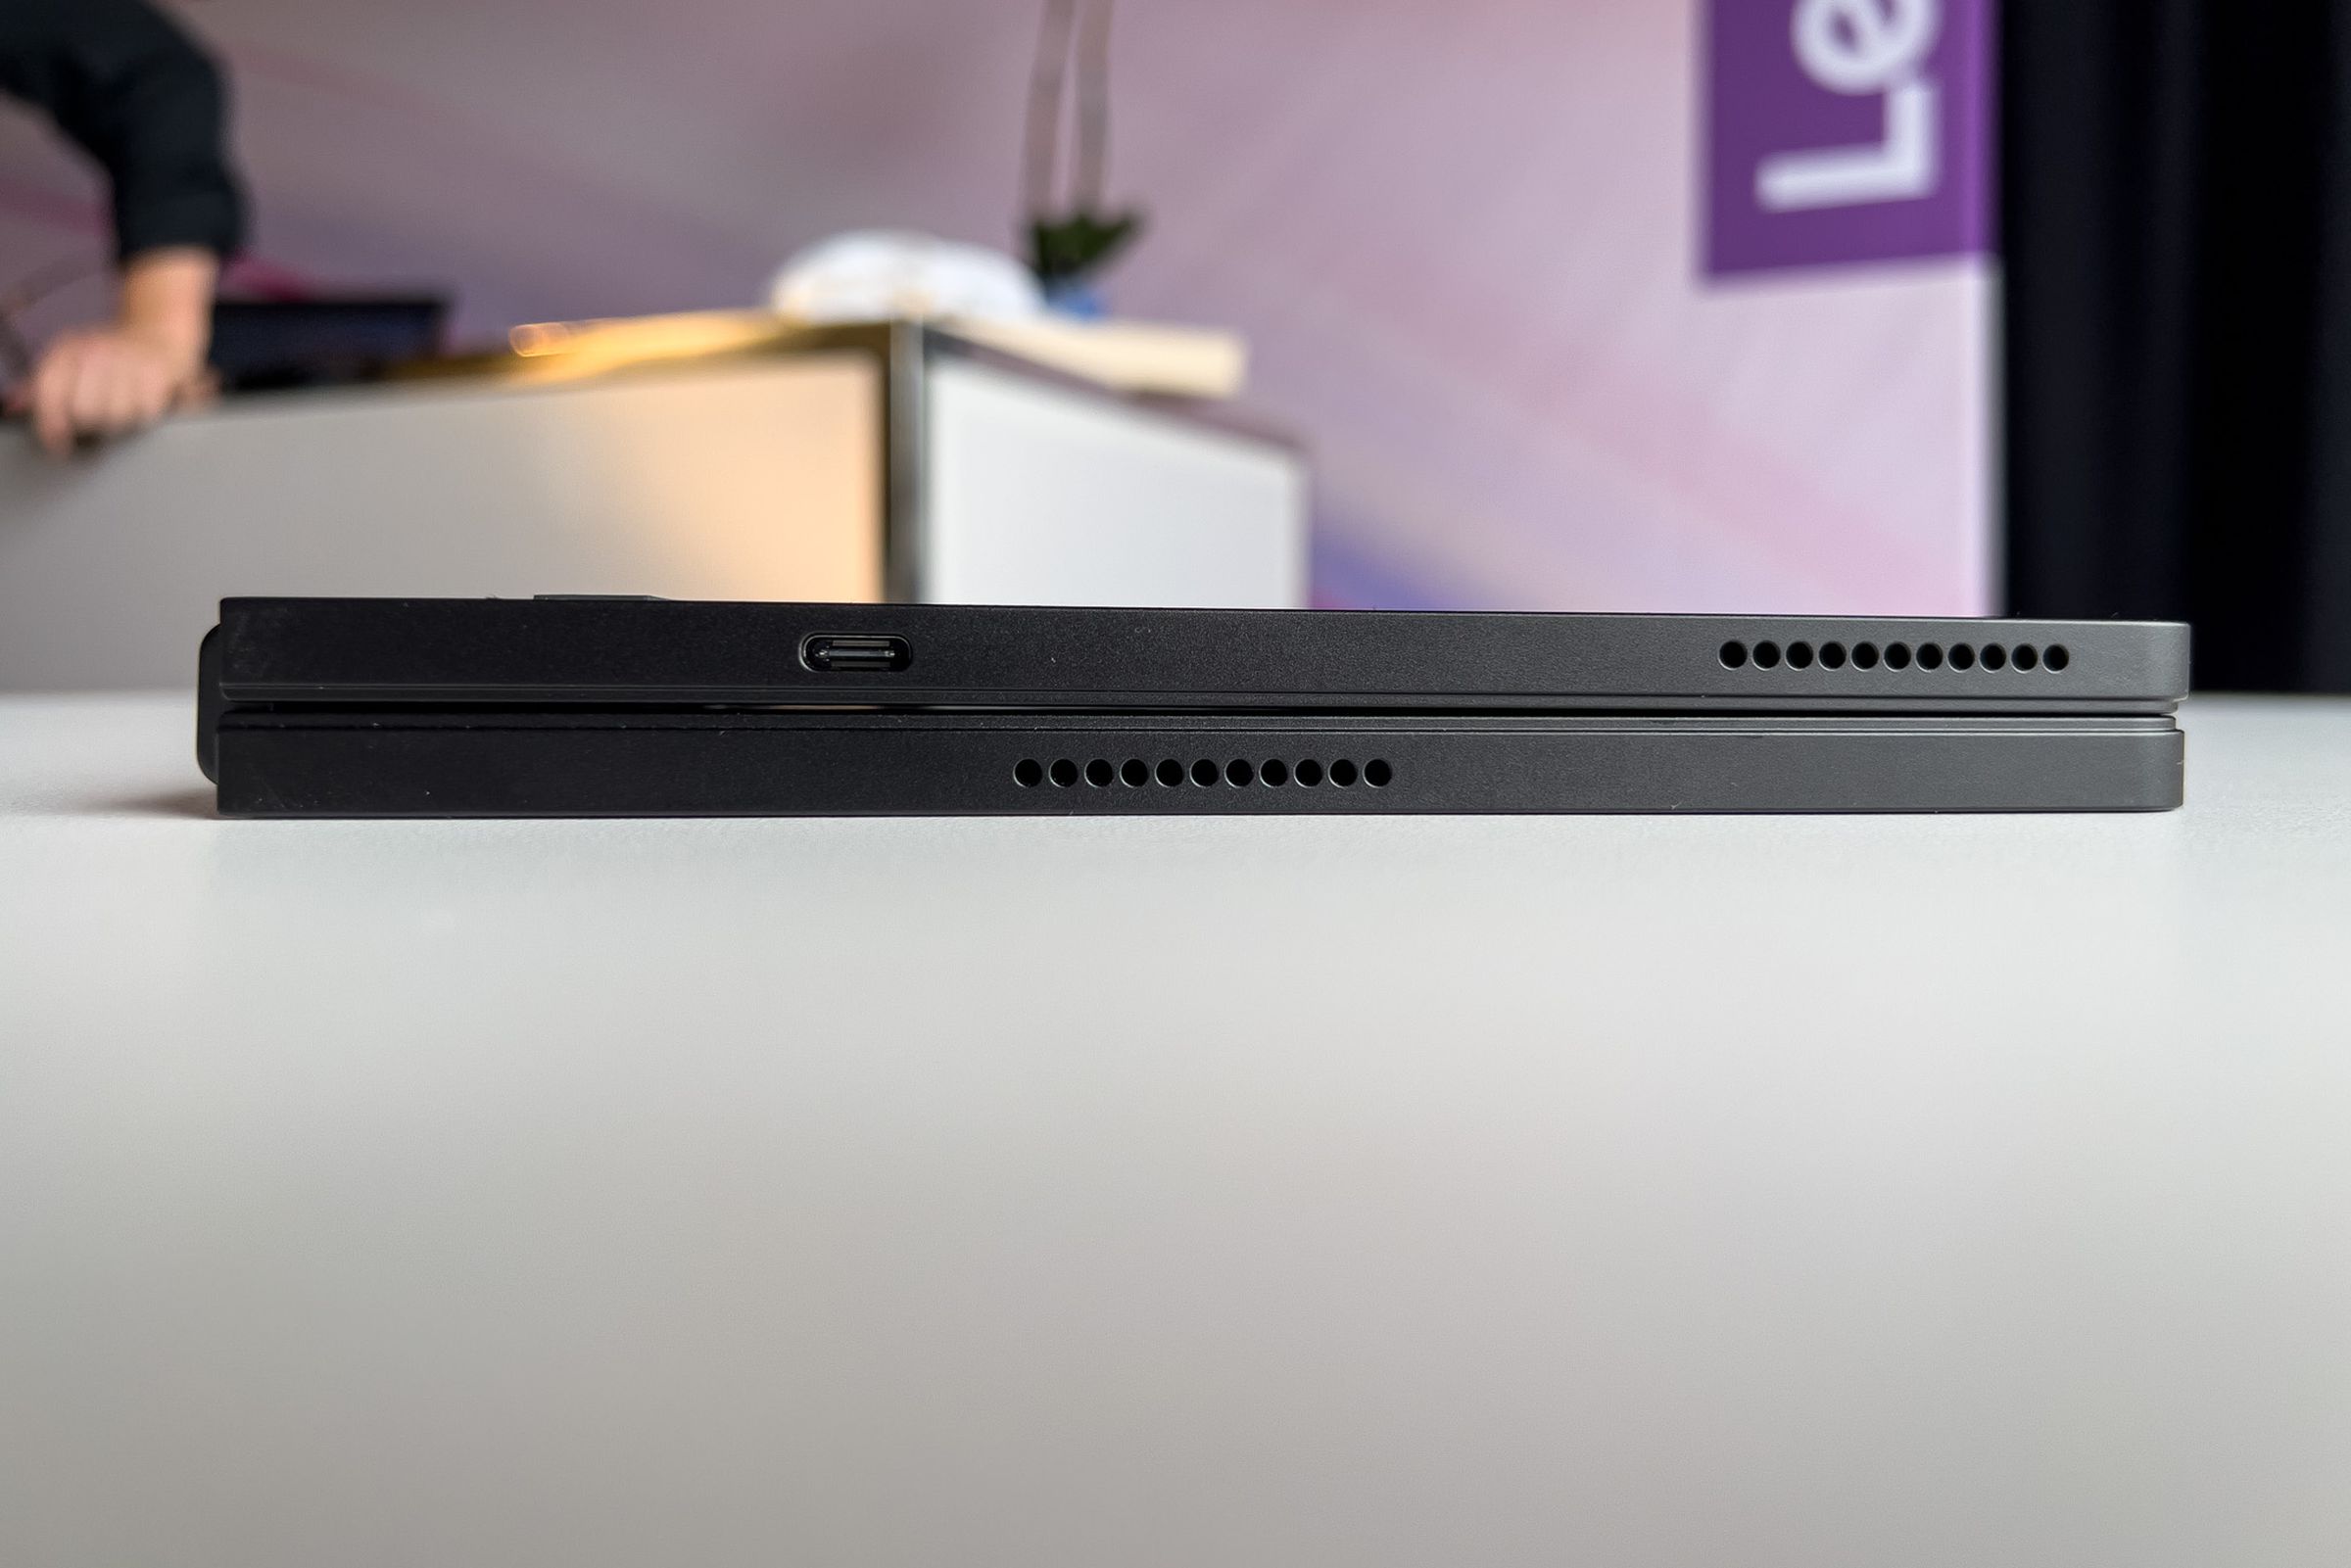 The Lenovo ThinkPad X1 Fold seen from the bottom, closed, in a demo area.